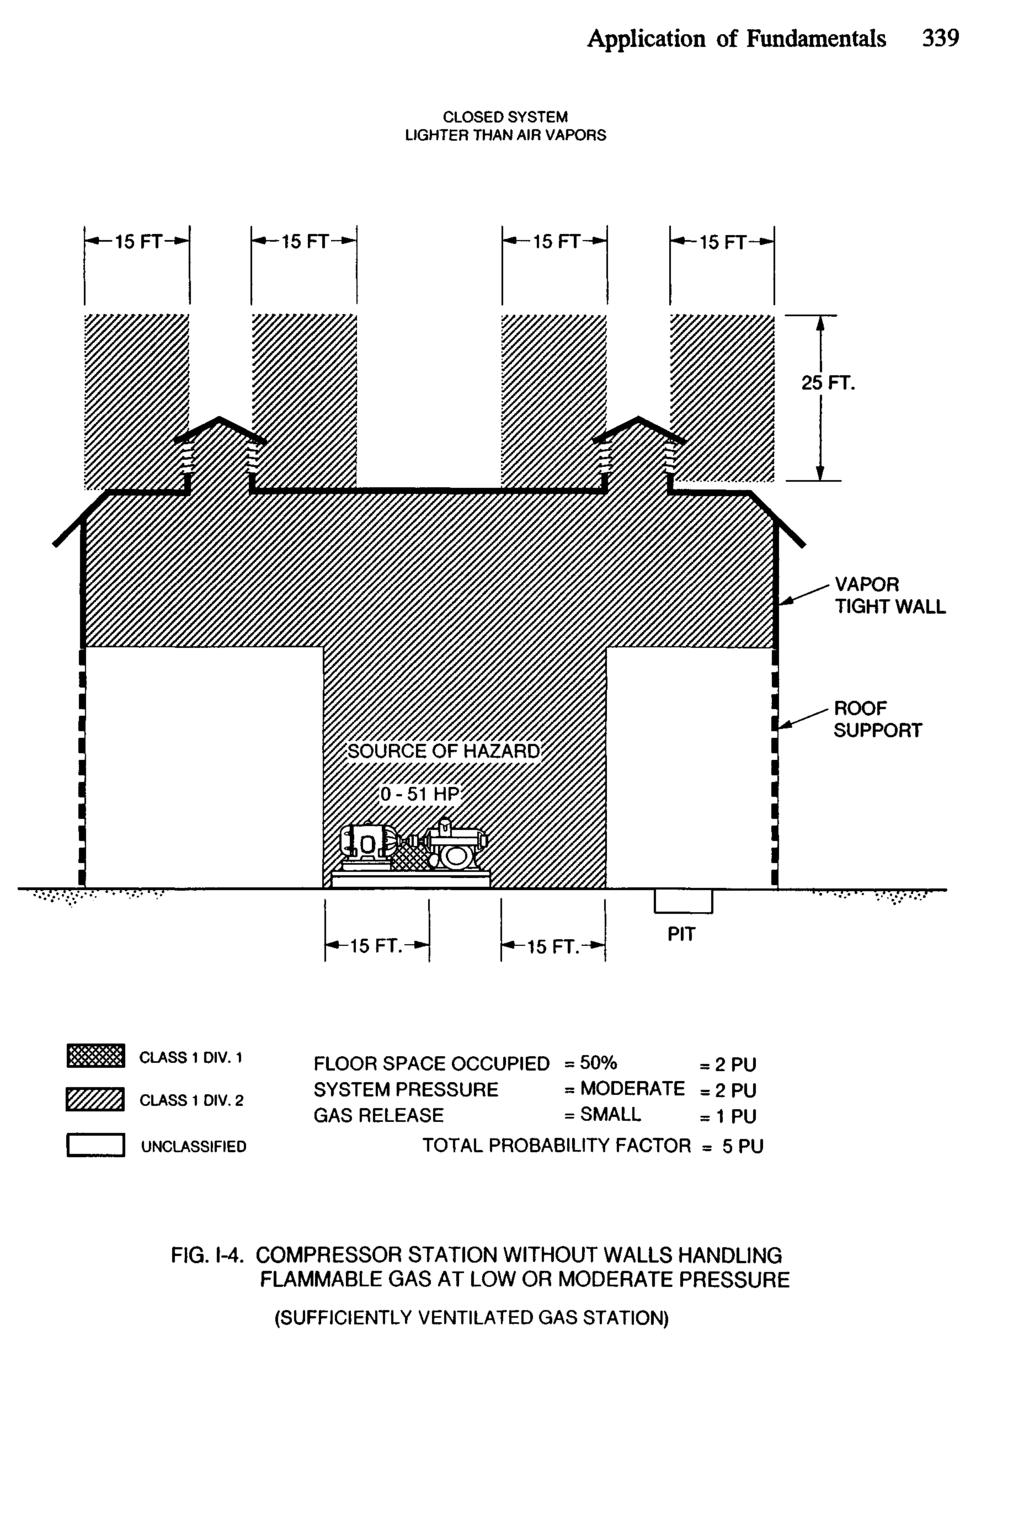 CLOSED SYSTEM LIGHTER THAN AIR VAPORS VAPOR TIGHT WALL!SOURCE OF HAZARD ROOF SUPPORT CLASS 1 DlV.